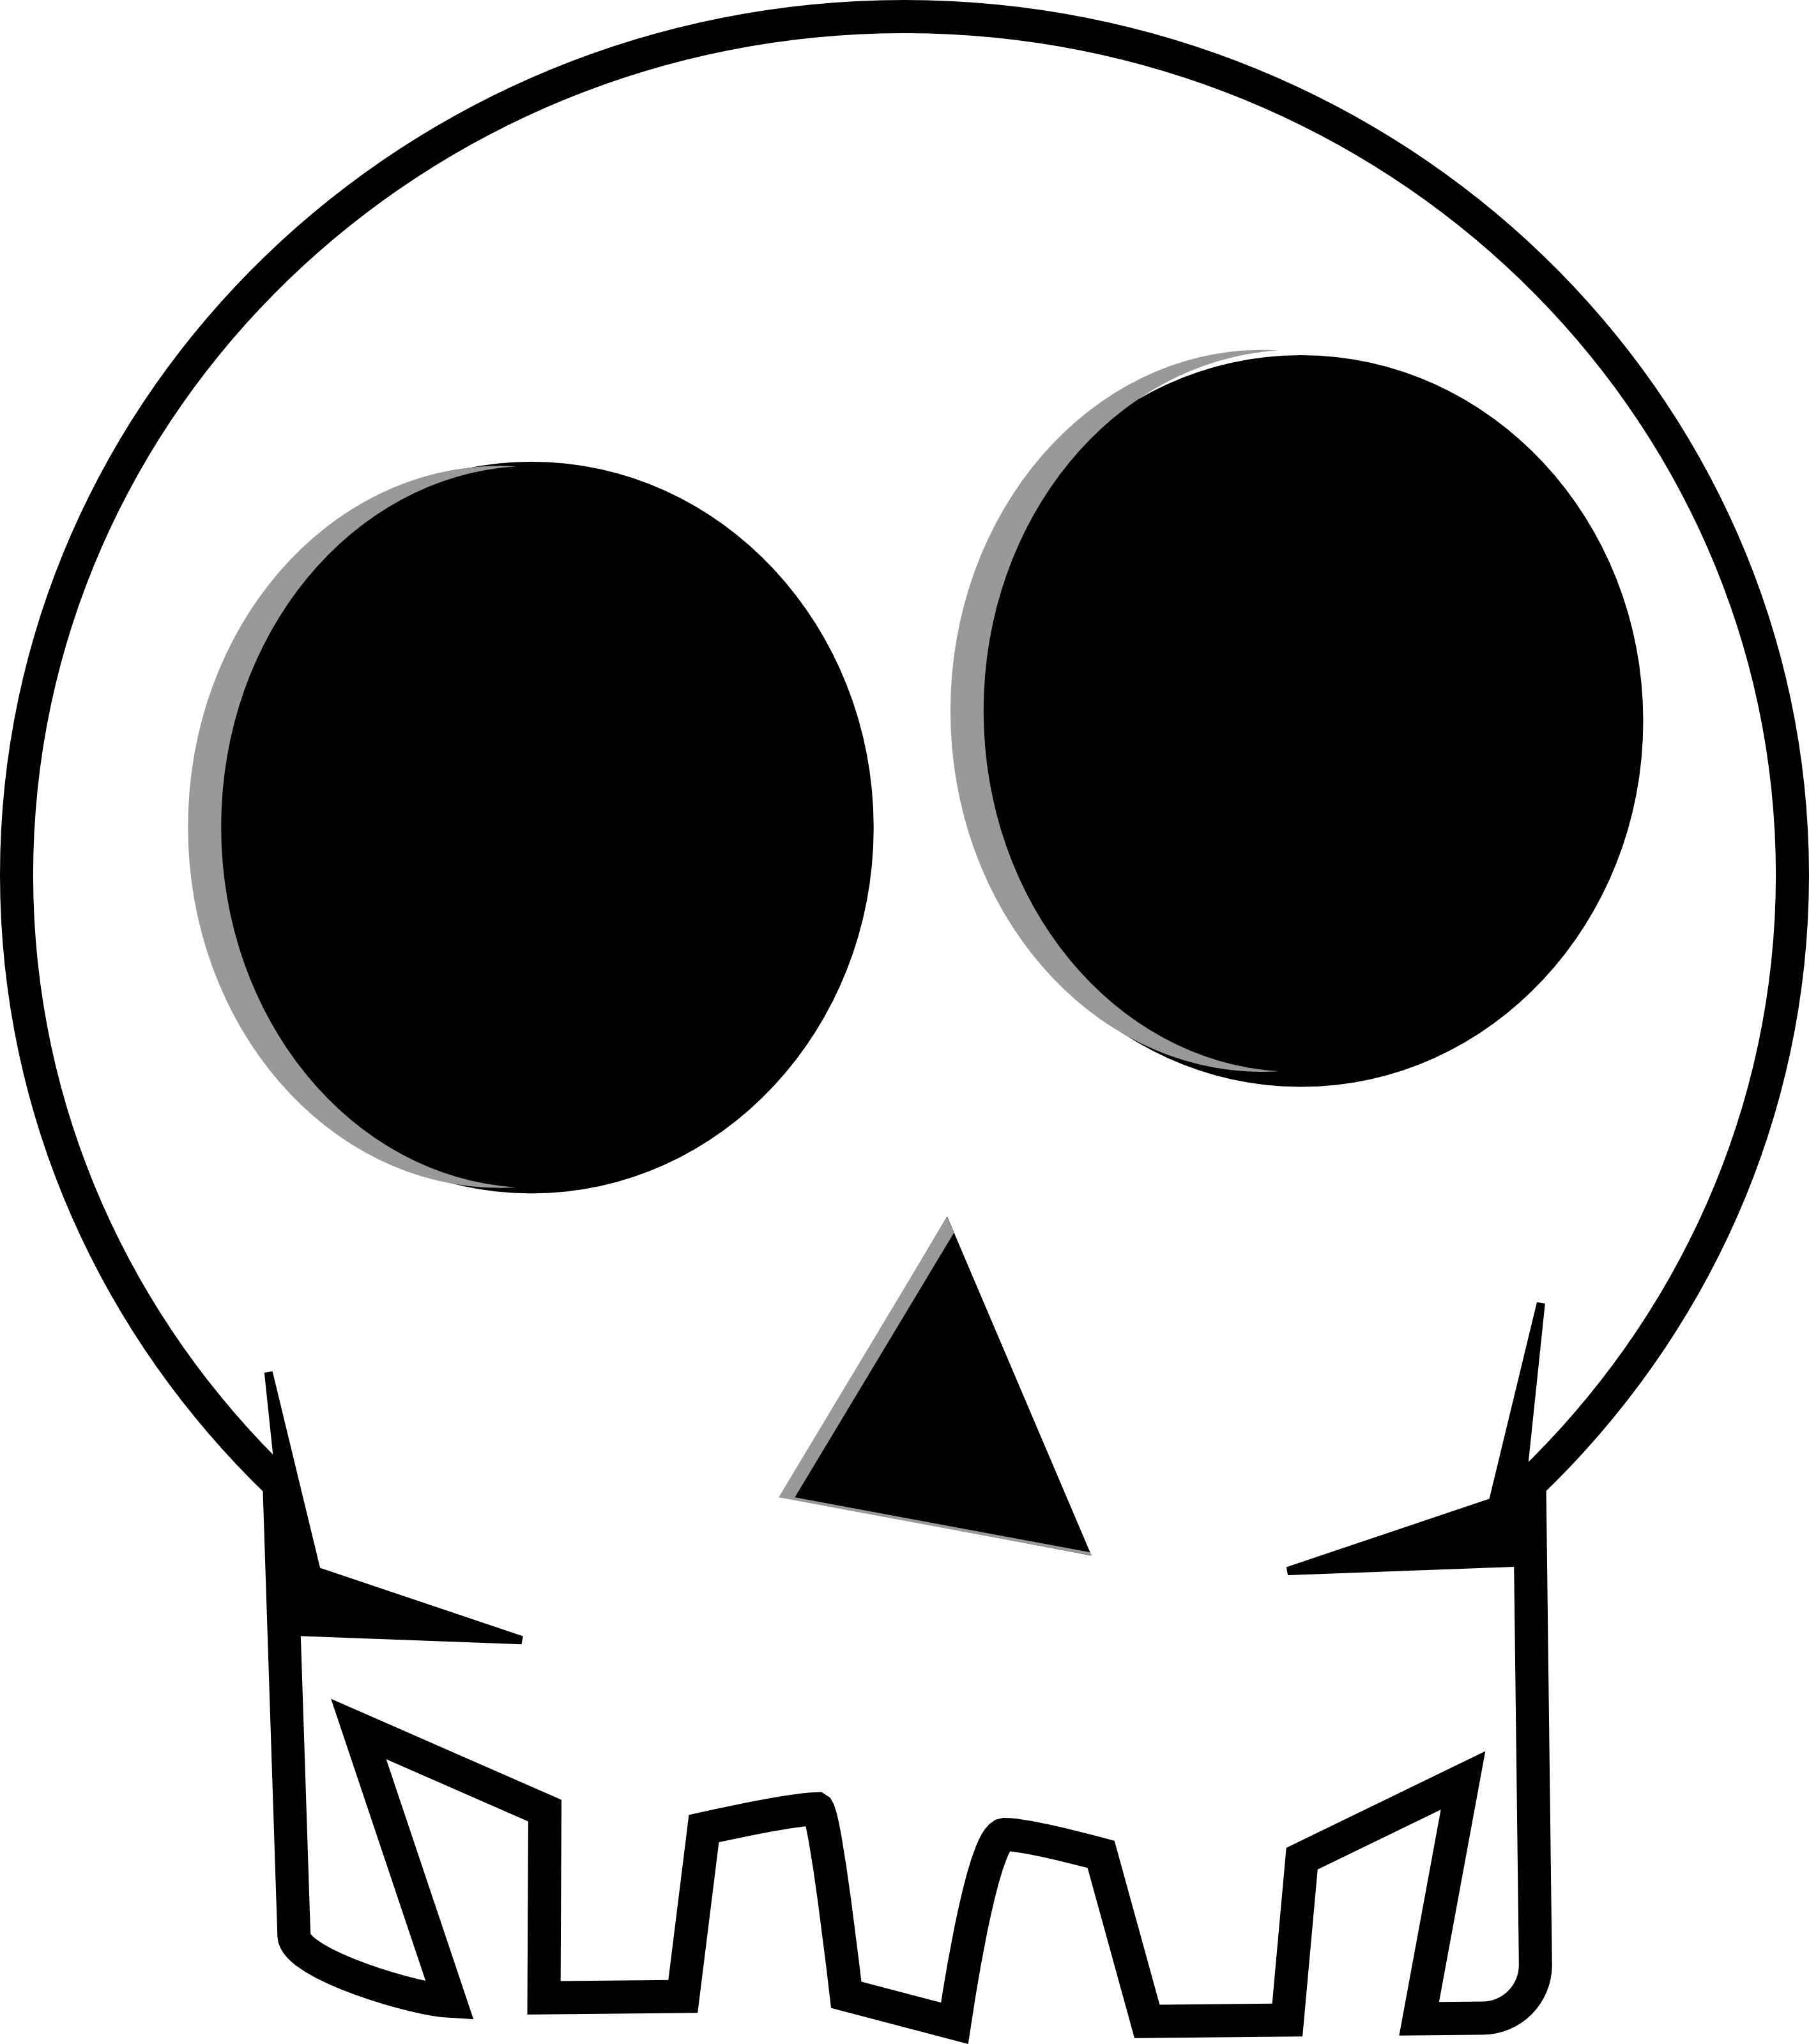 Skull Clip Art Background - Free Clipart Images